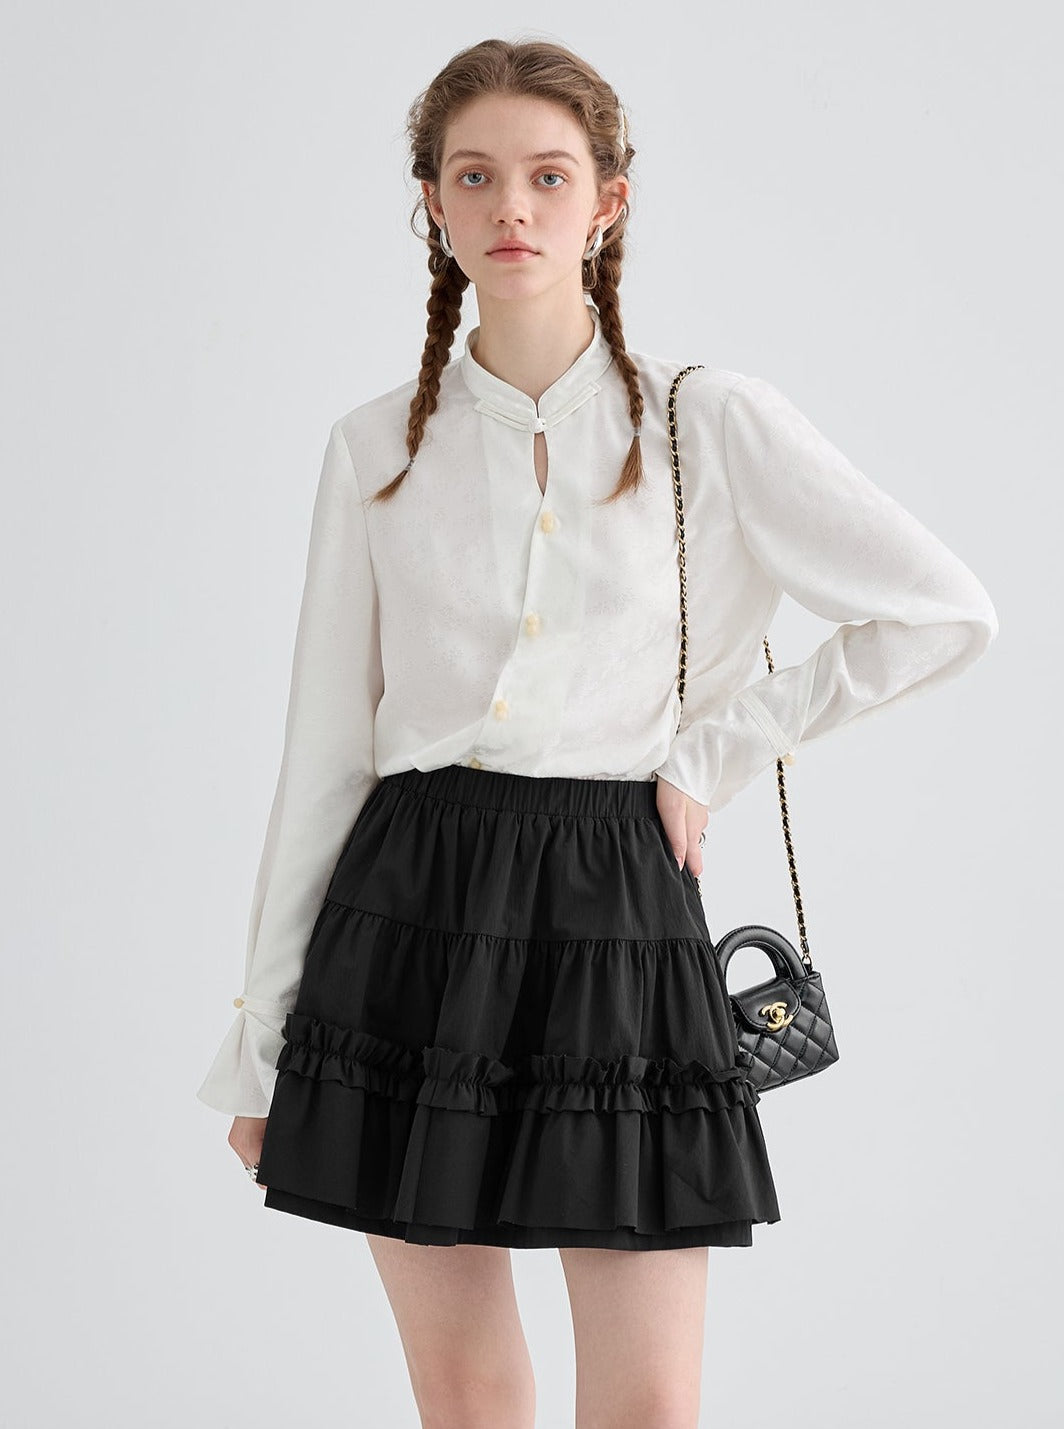 Double lace fluffy skirt